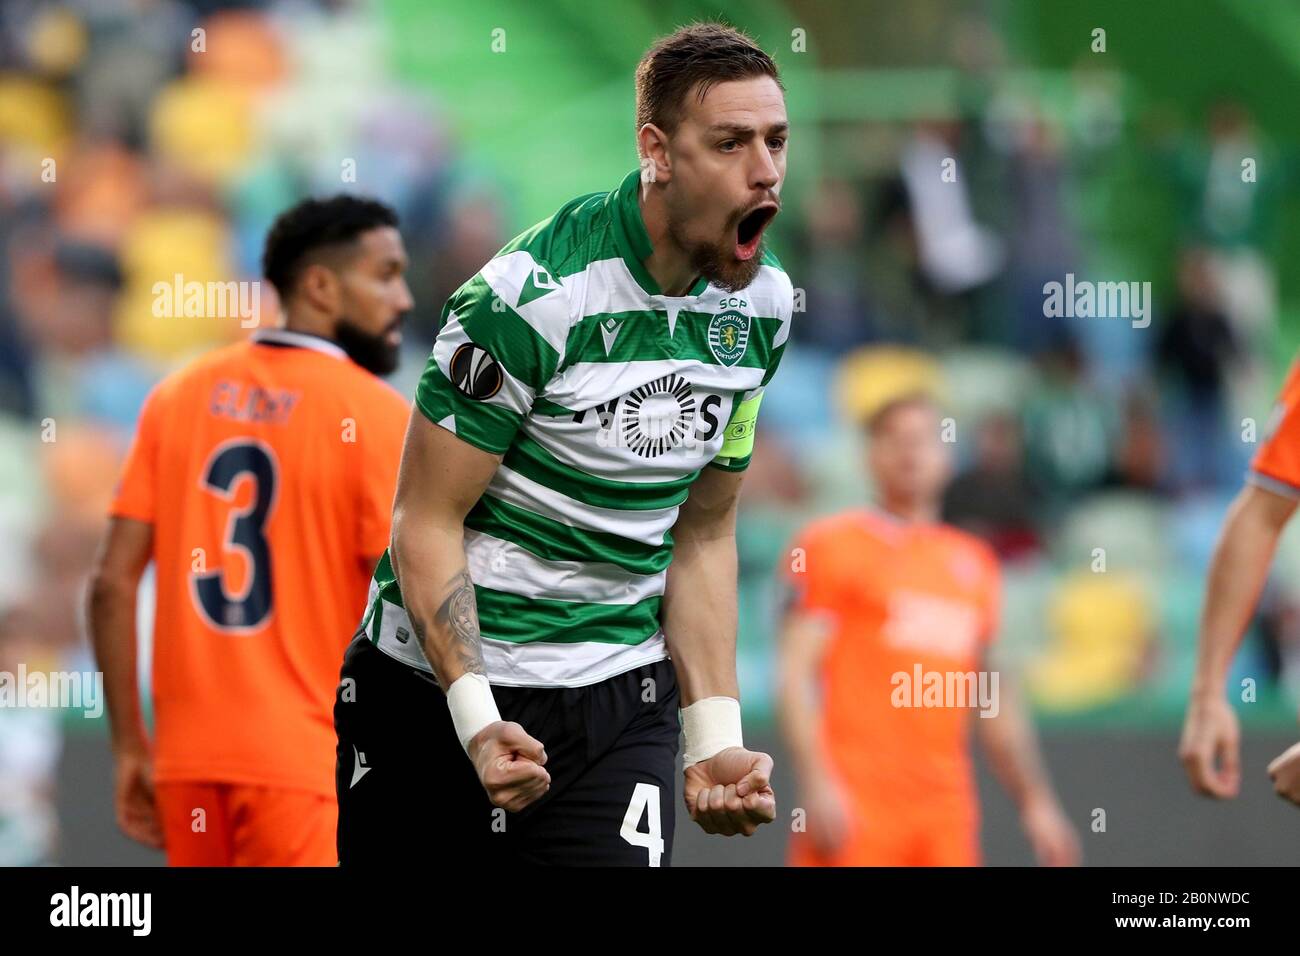 Lisbon, Portugal. 20th Feb, 2020. Sebastian Coates of Sporting CP celebrates after scoring a goal during the UEFA Europa League round of 32 first leg football match between Sporting CP and Istanbul Basaksehir at Alvalade stadium in Lisbon, Portugal, on Feb. 20, 2020. Credit: Pedro Fiuza/Xinhua/Alamy Live News Stock Photo